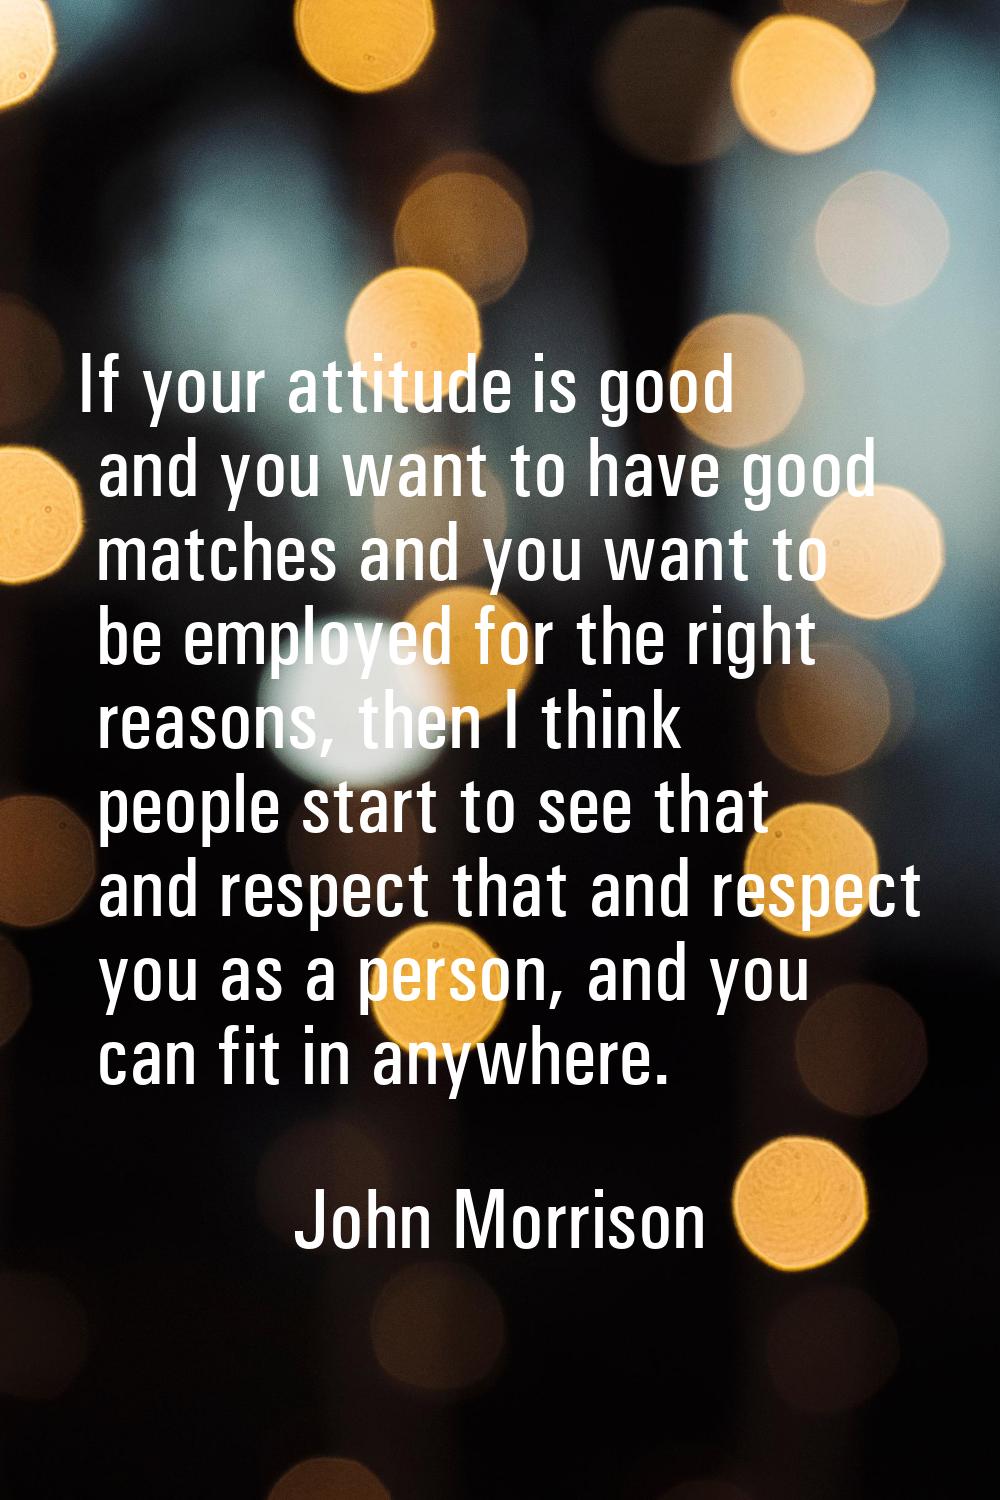 If your attitude is good and you want to have good matches and you want to be employed for the righ